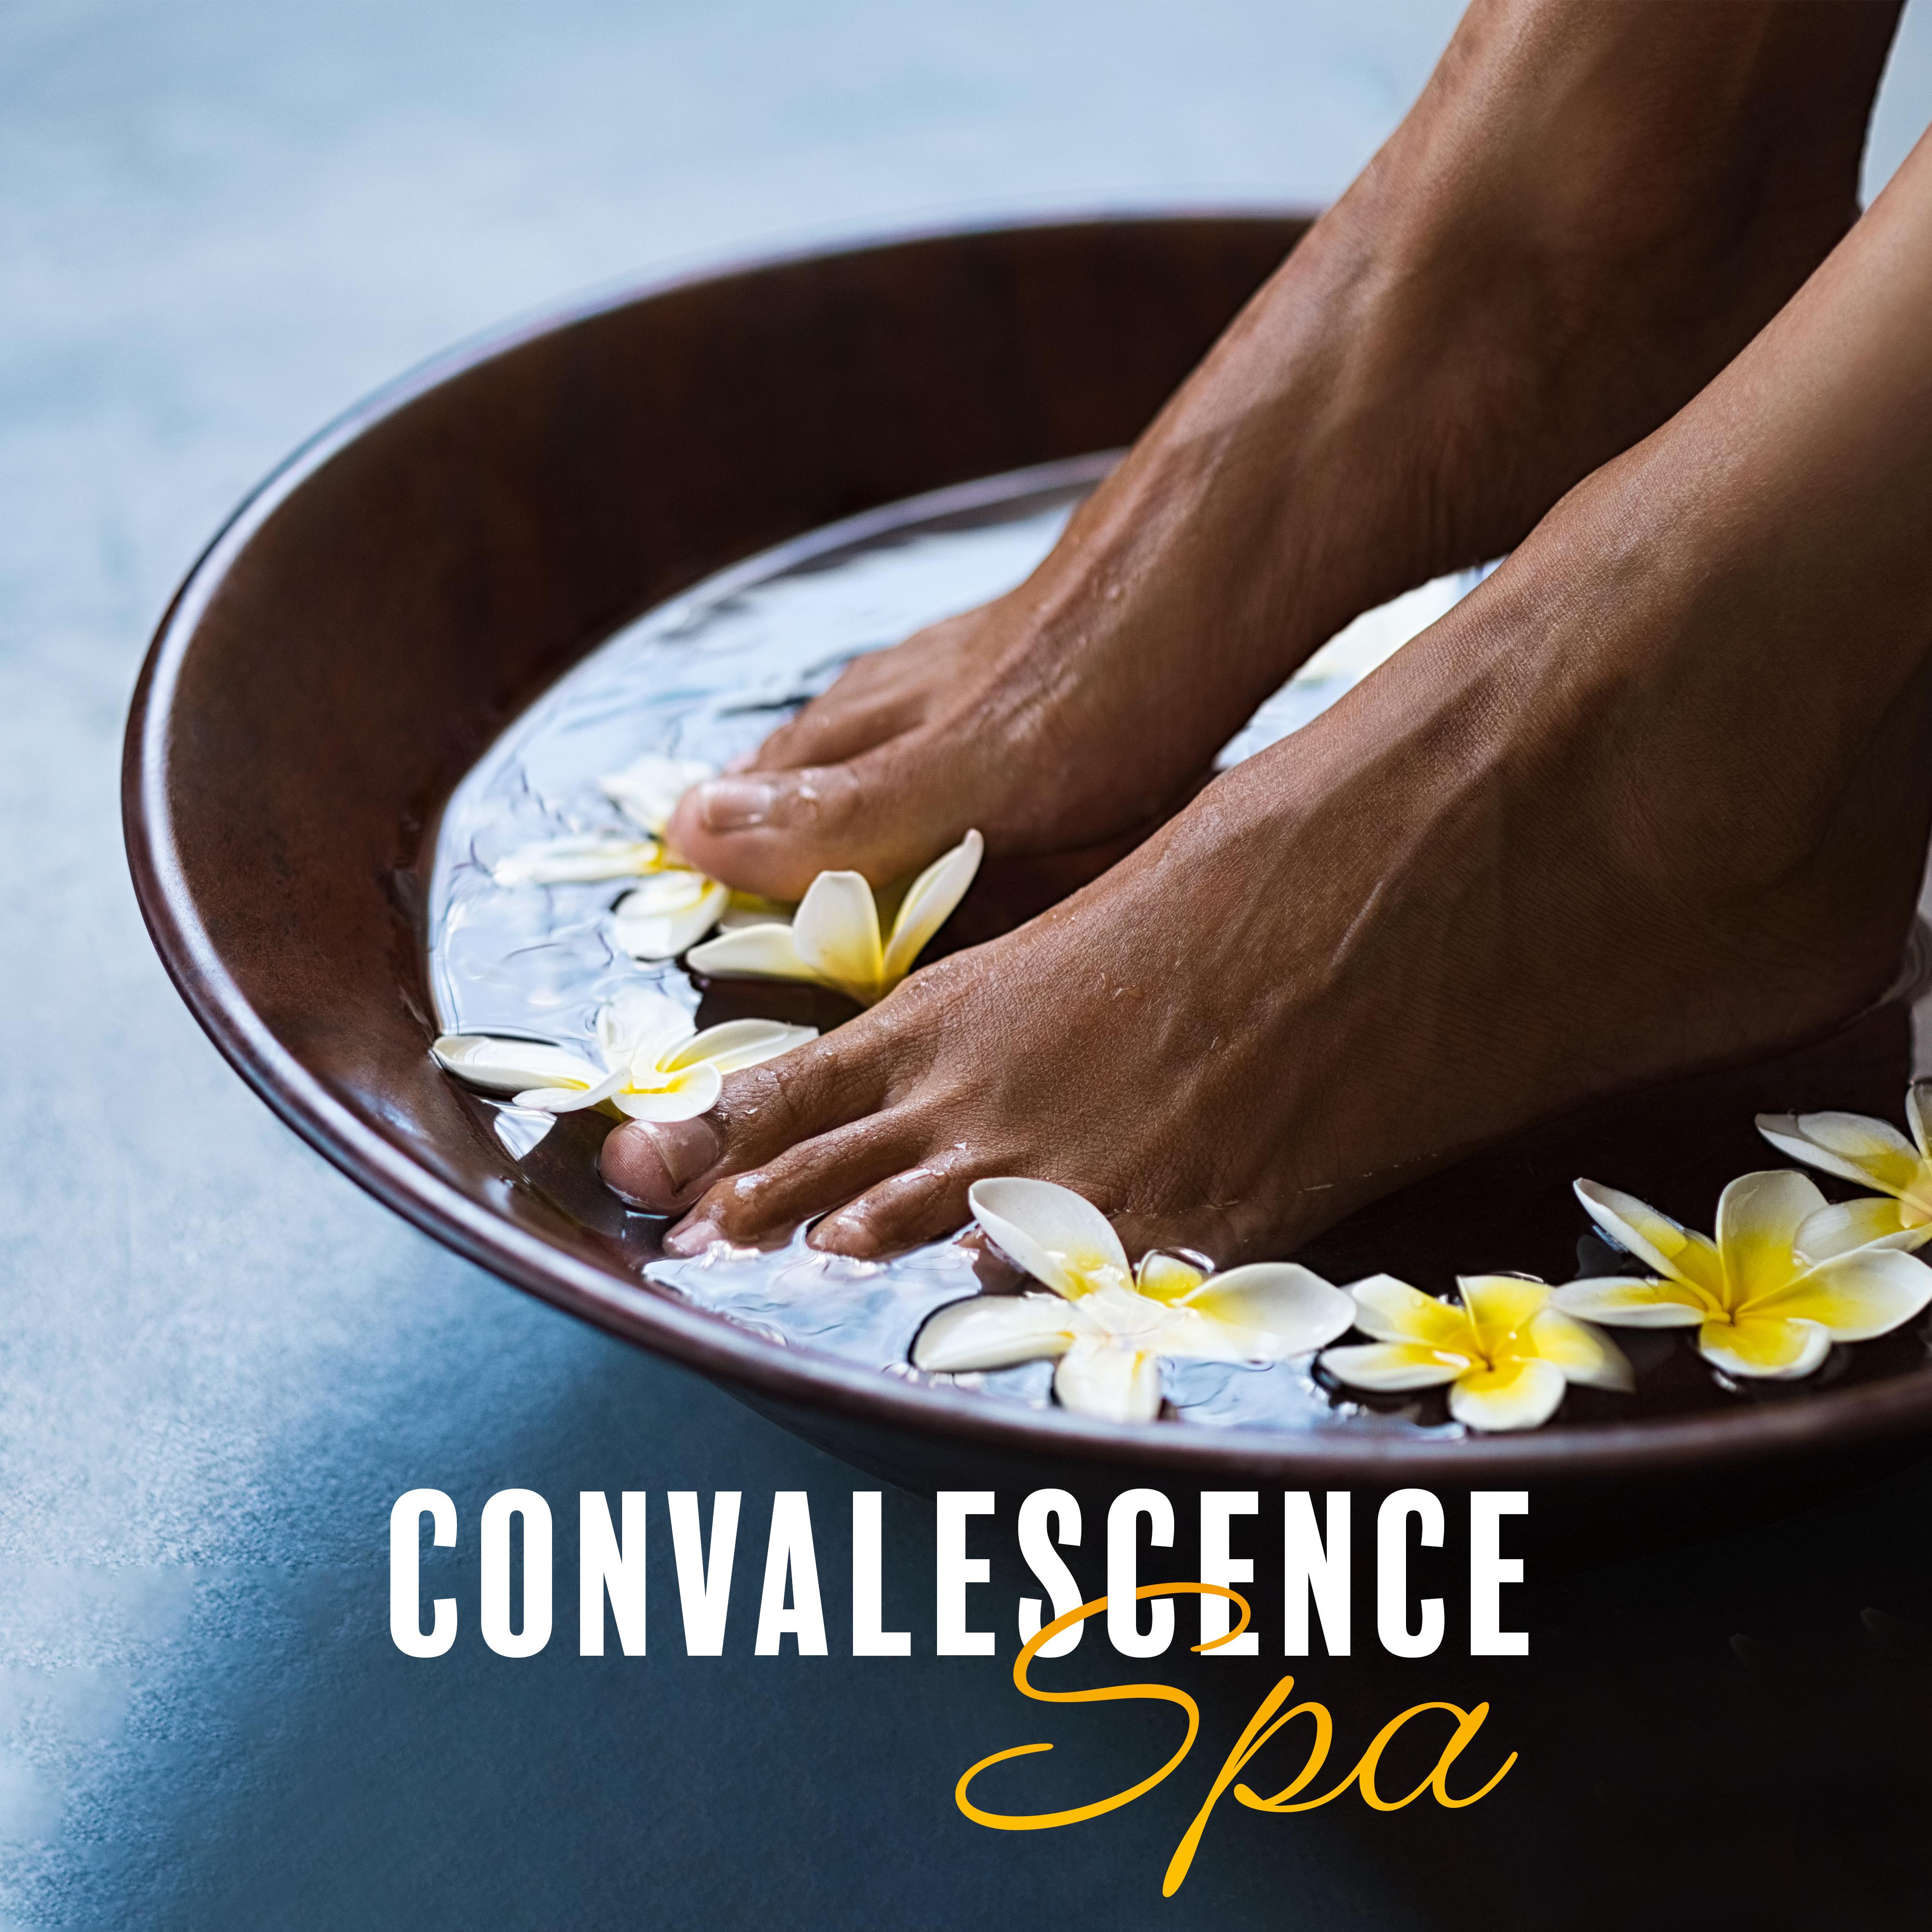 Convalescence Spa: Background Music for Spa Treatments such as Massages, Baths, Rejuvenating, Beauty and Relaxation Treatments, and Many More